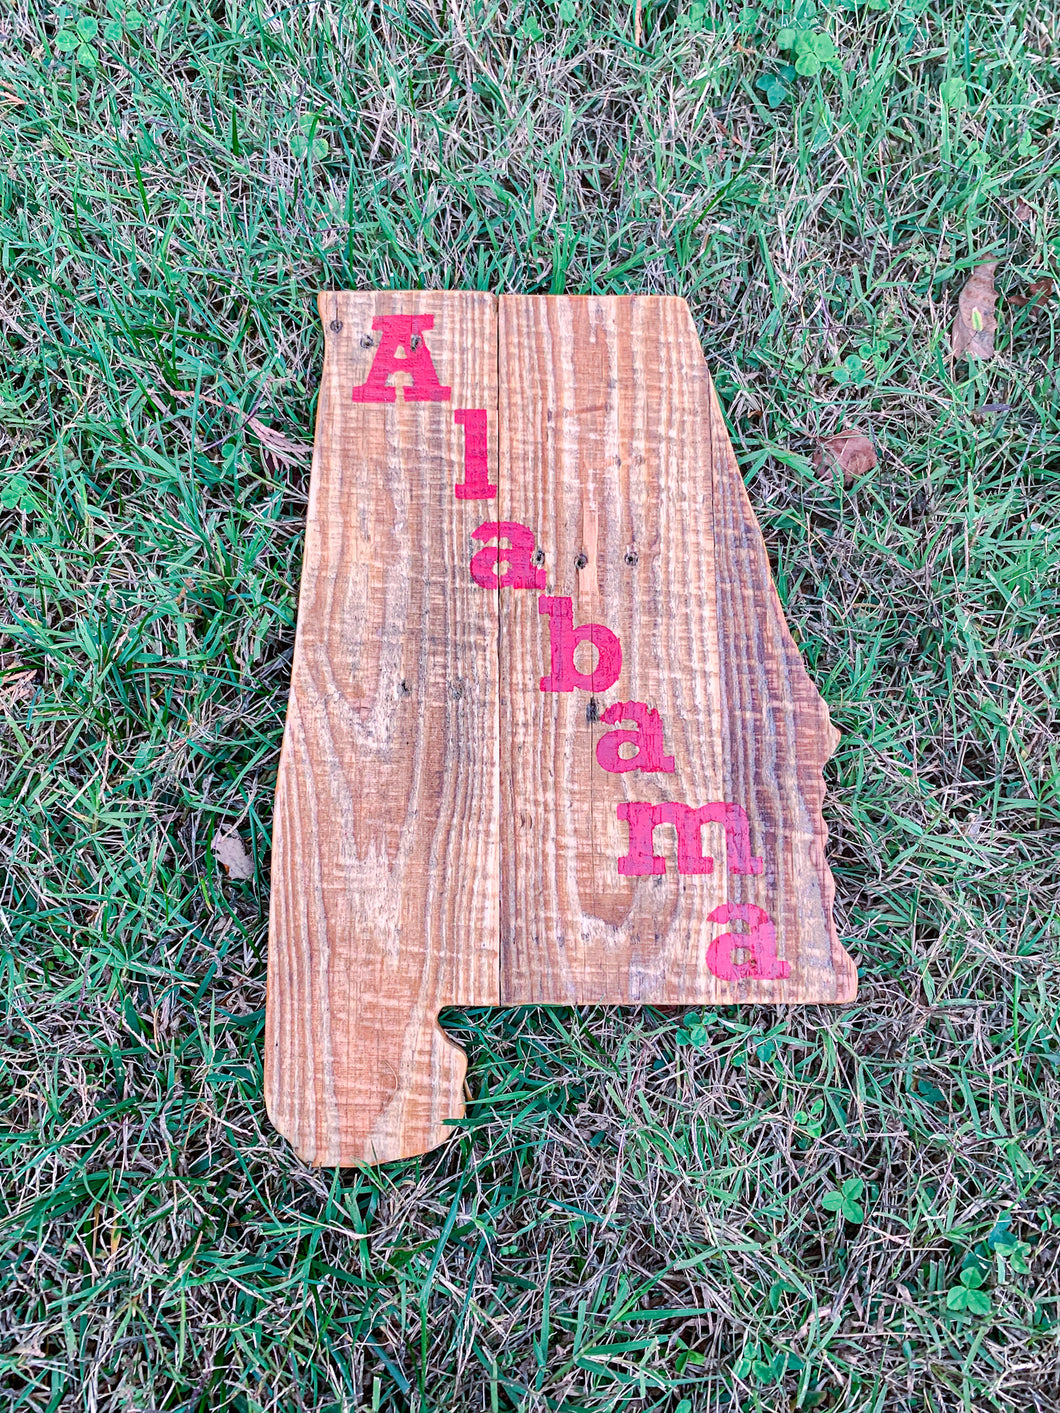 Rustic Natural Alabama with Red Detail